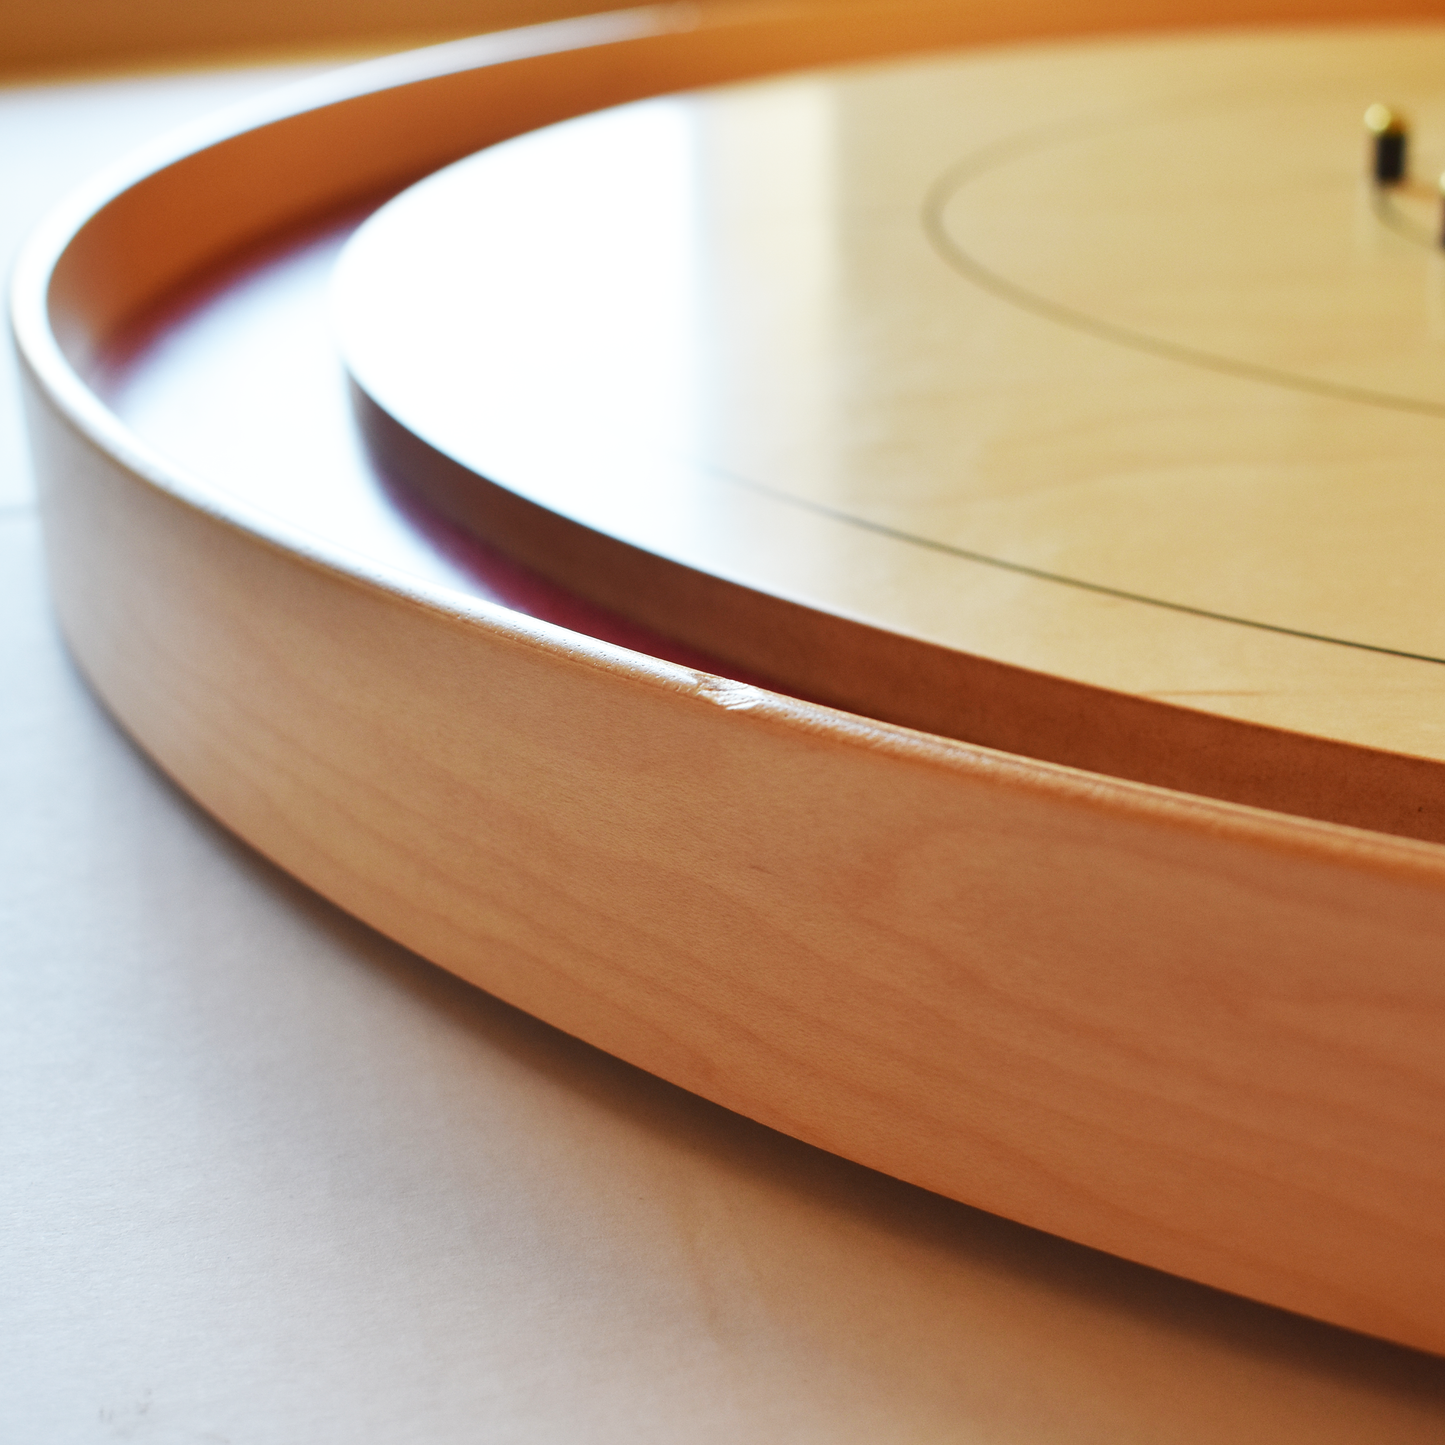 The Tracey Red Board - Tournament Style Crokinole Board Game Set (Meets NCA Standards)